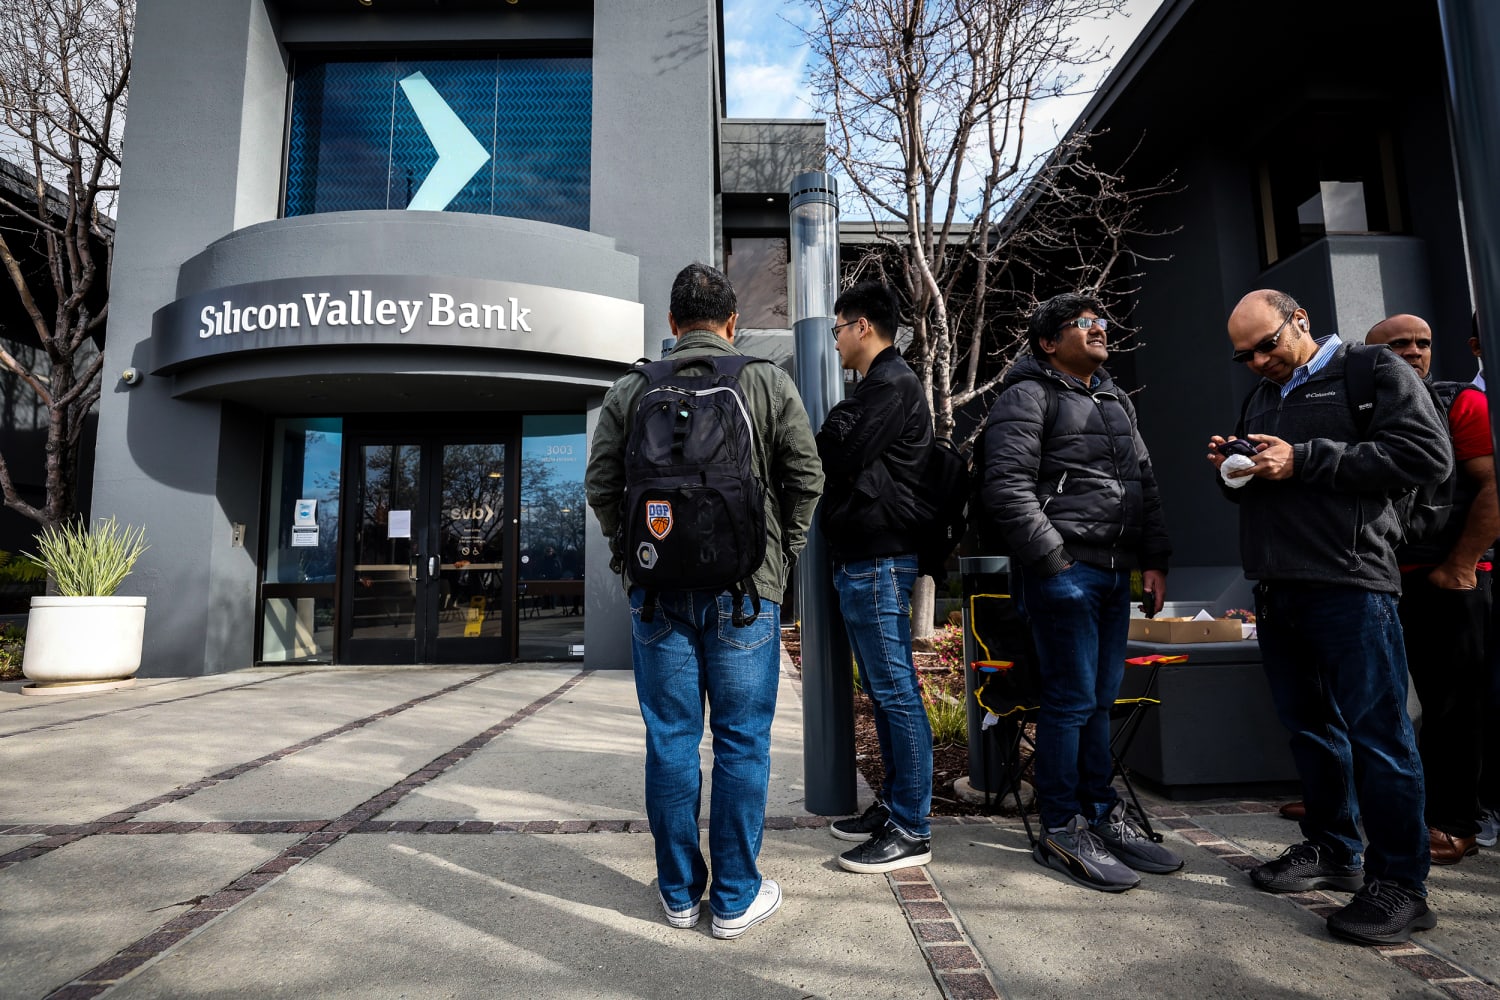 Silicon Valley Bank collapse puts new spotlight on Trump banking law